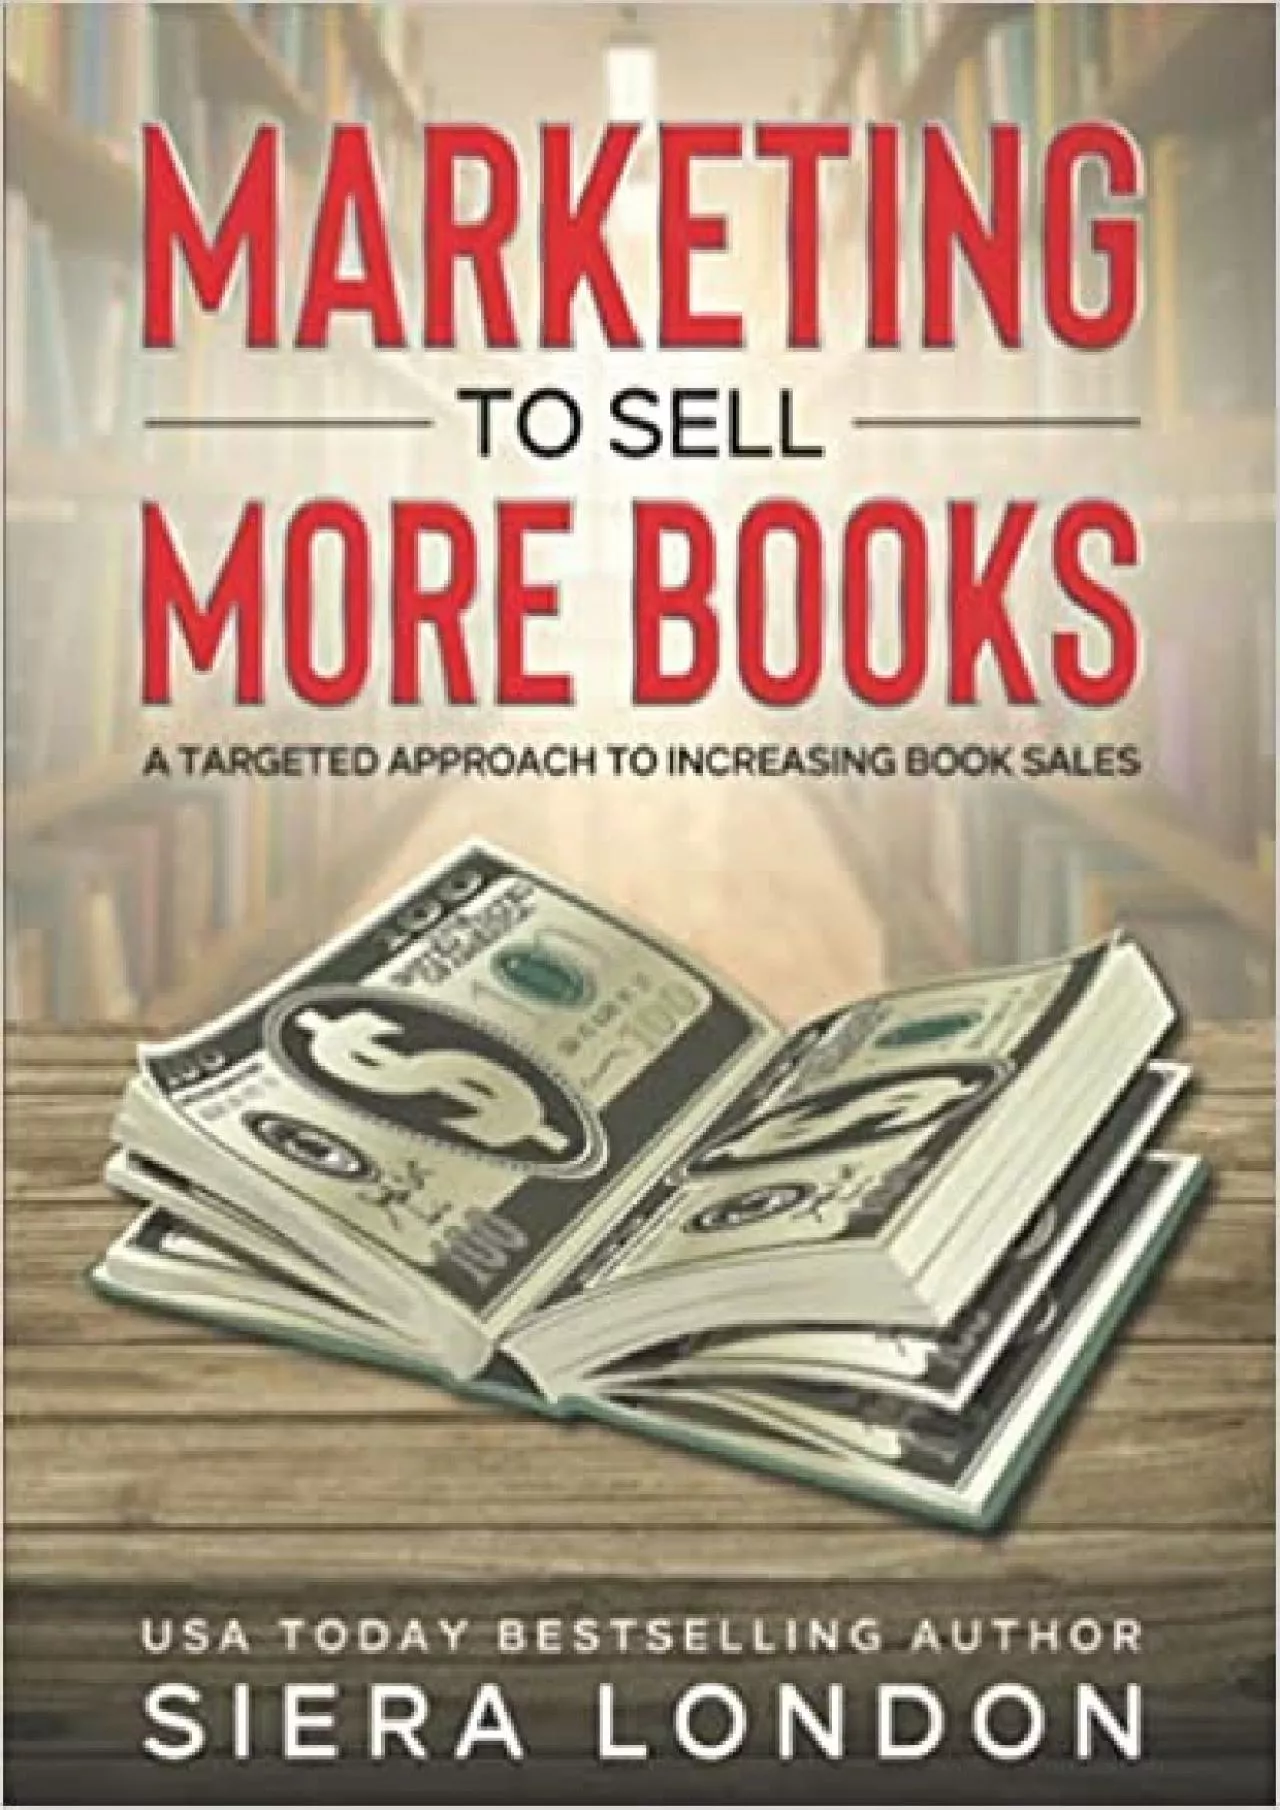 Marketing to Sell More Books A Targeted Approach to Increasing Book Sales, 12-month guided